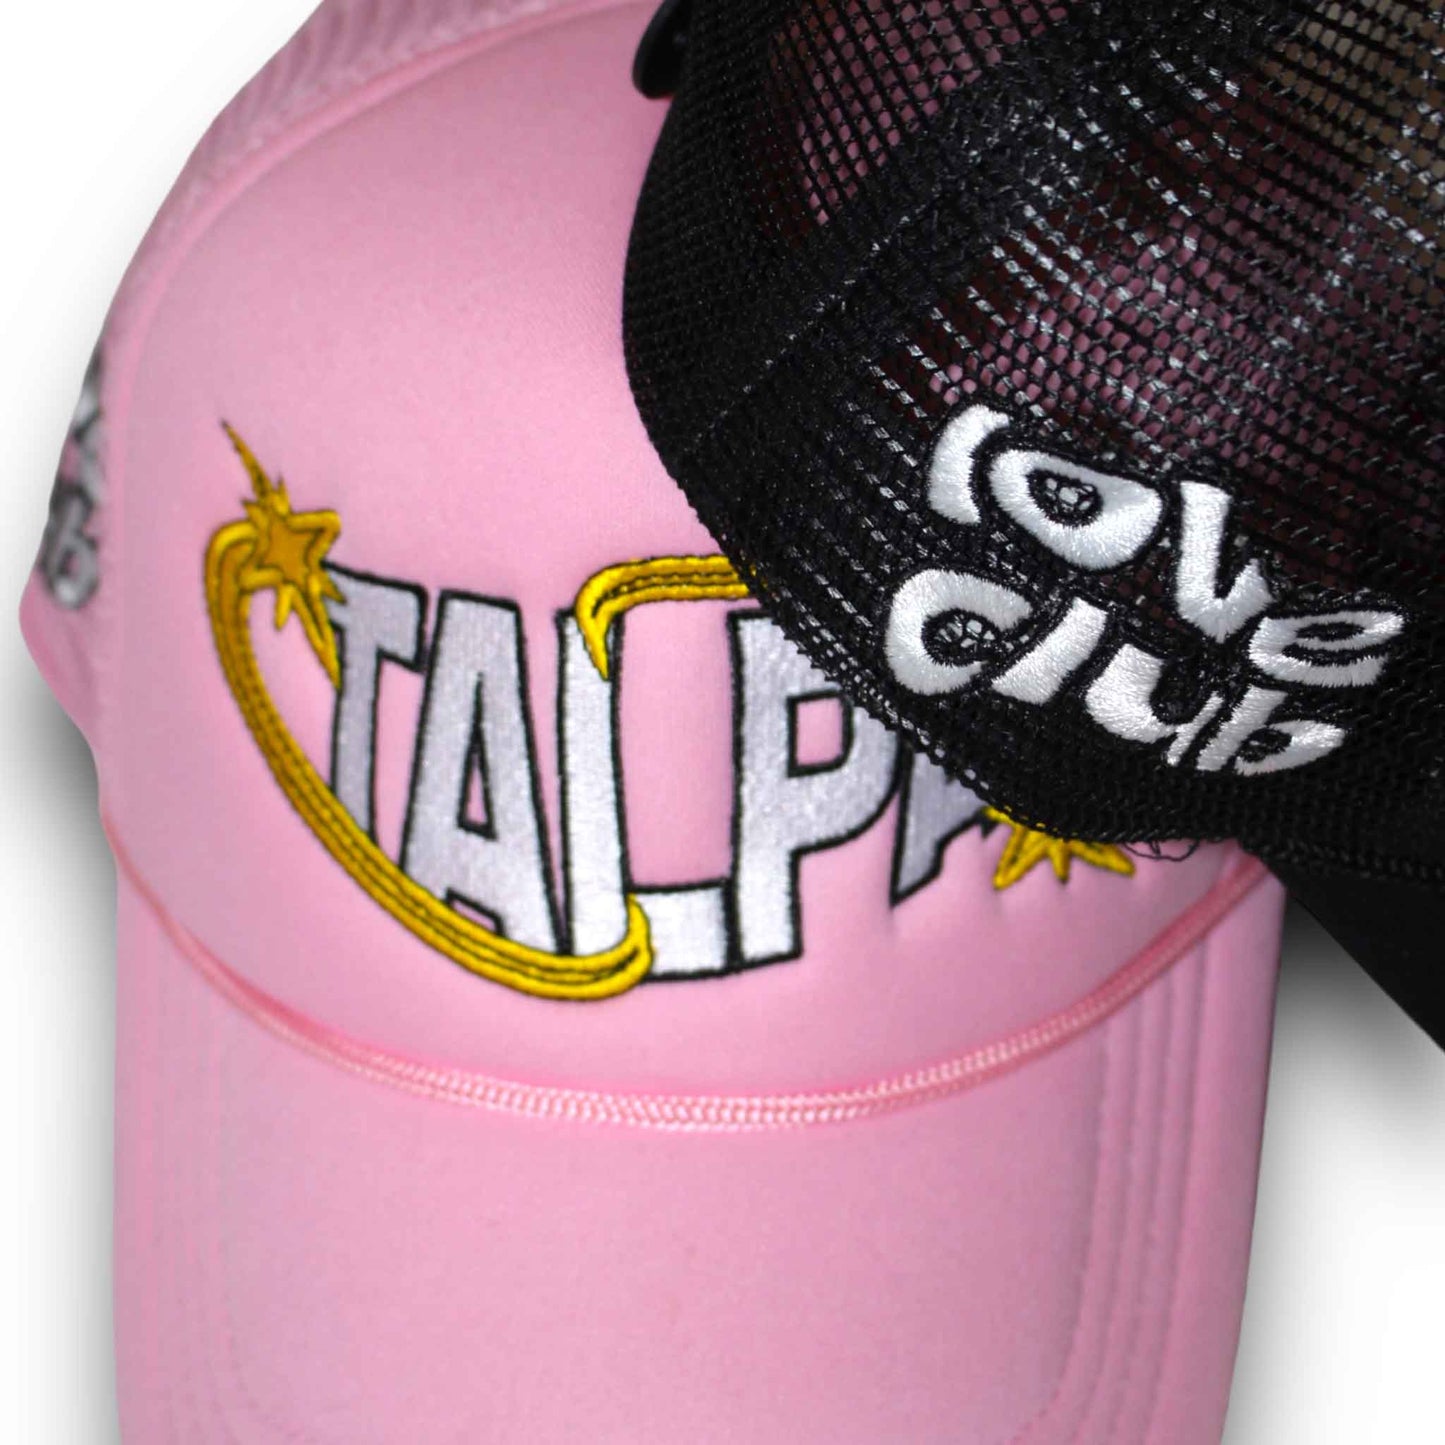 Recycle Cap Pink